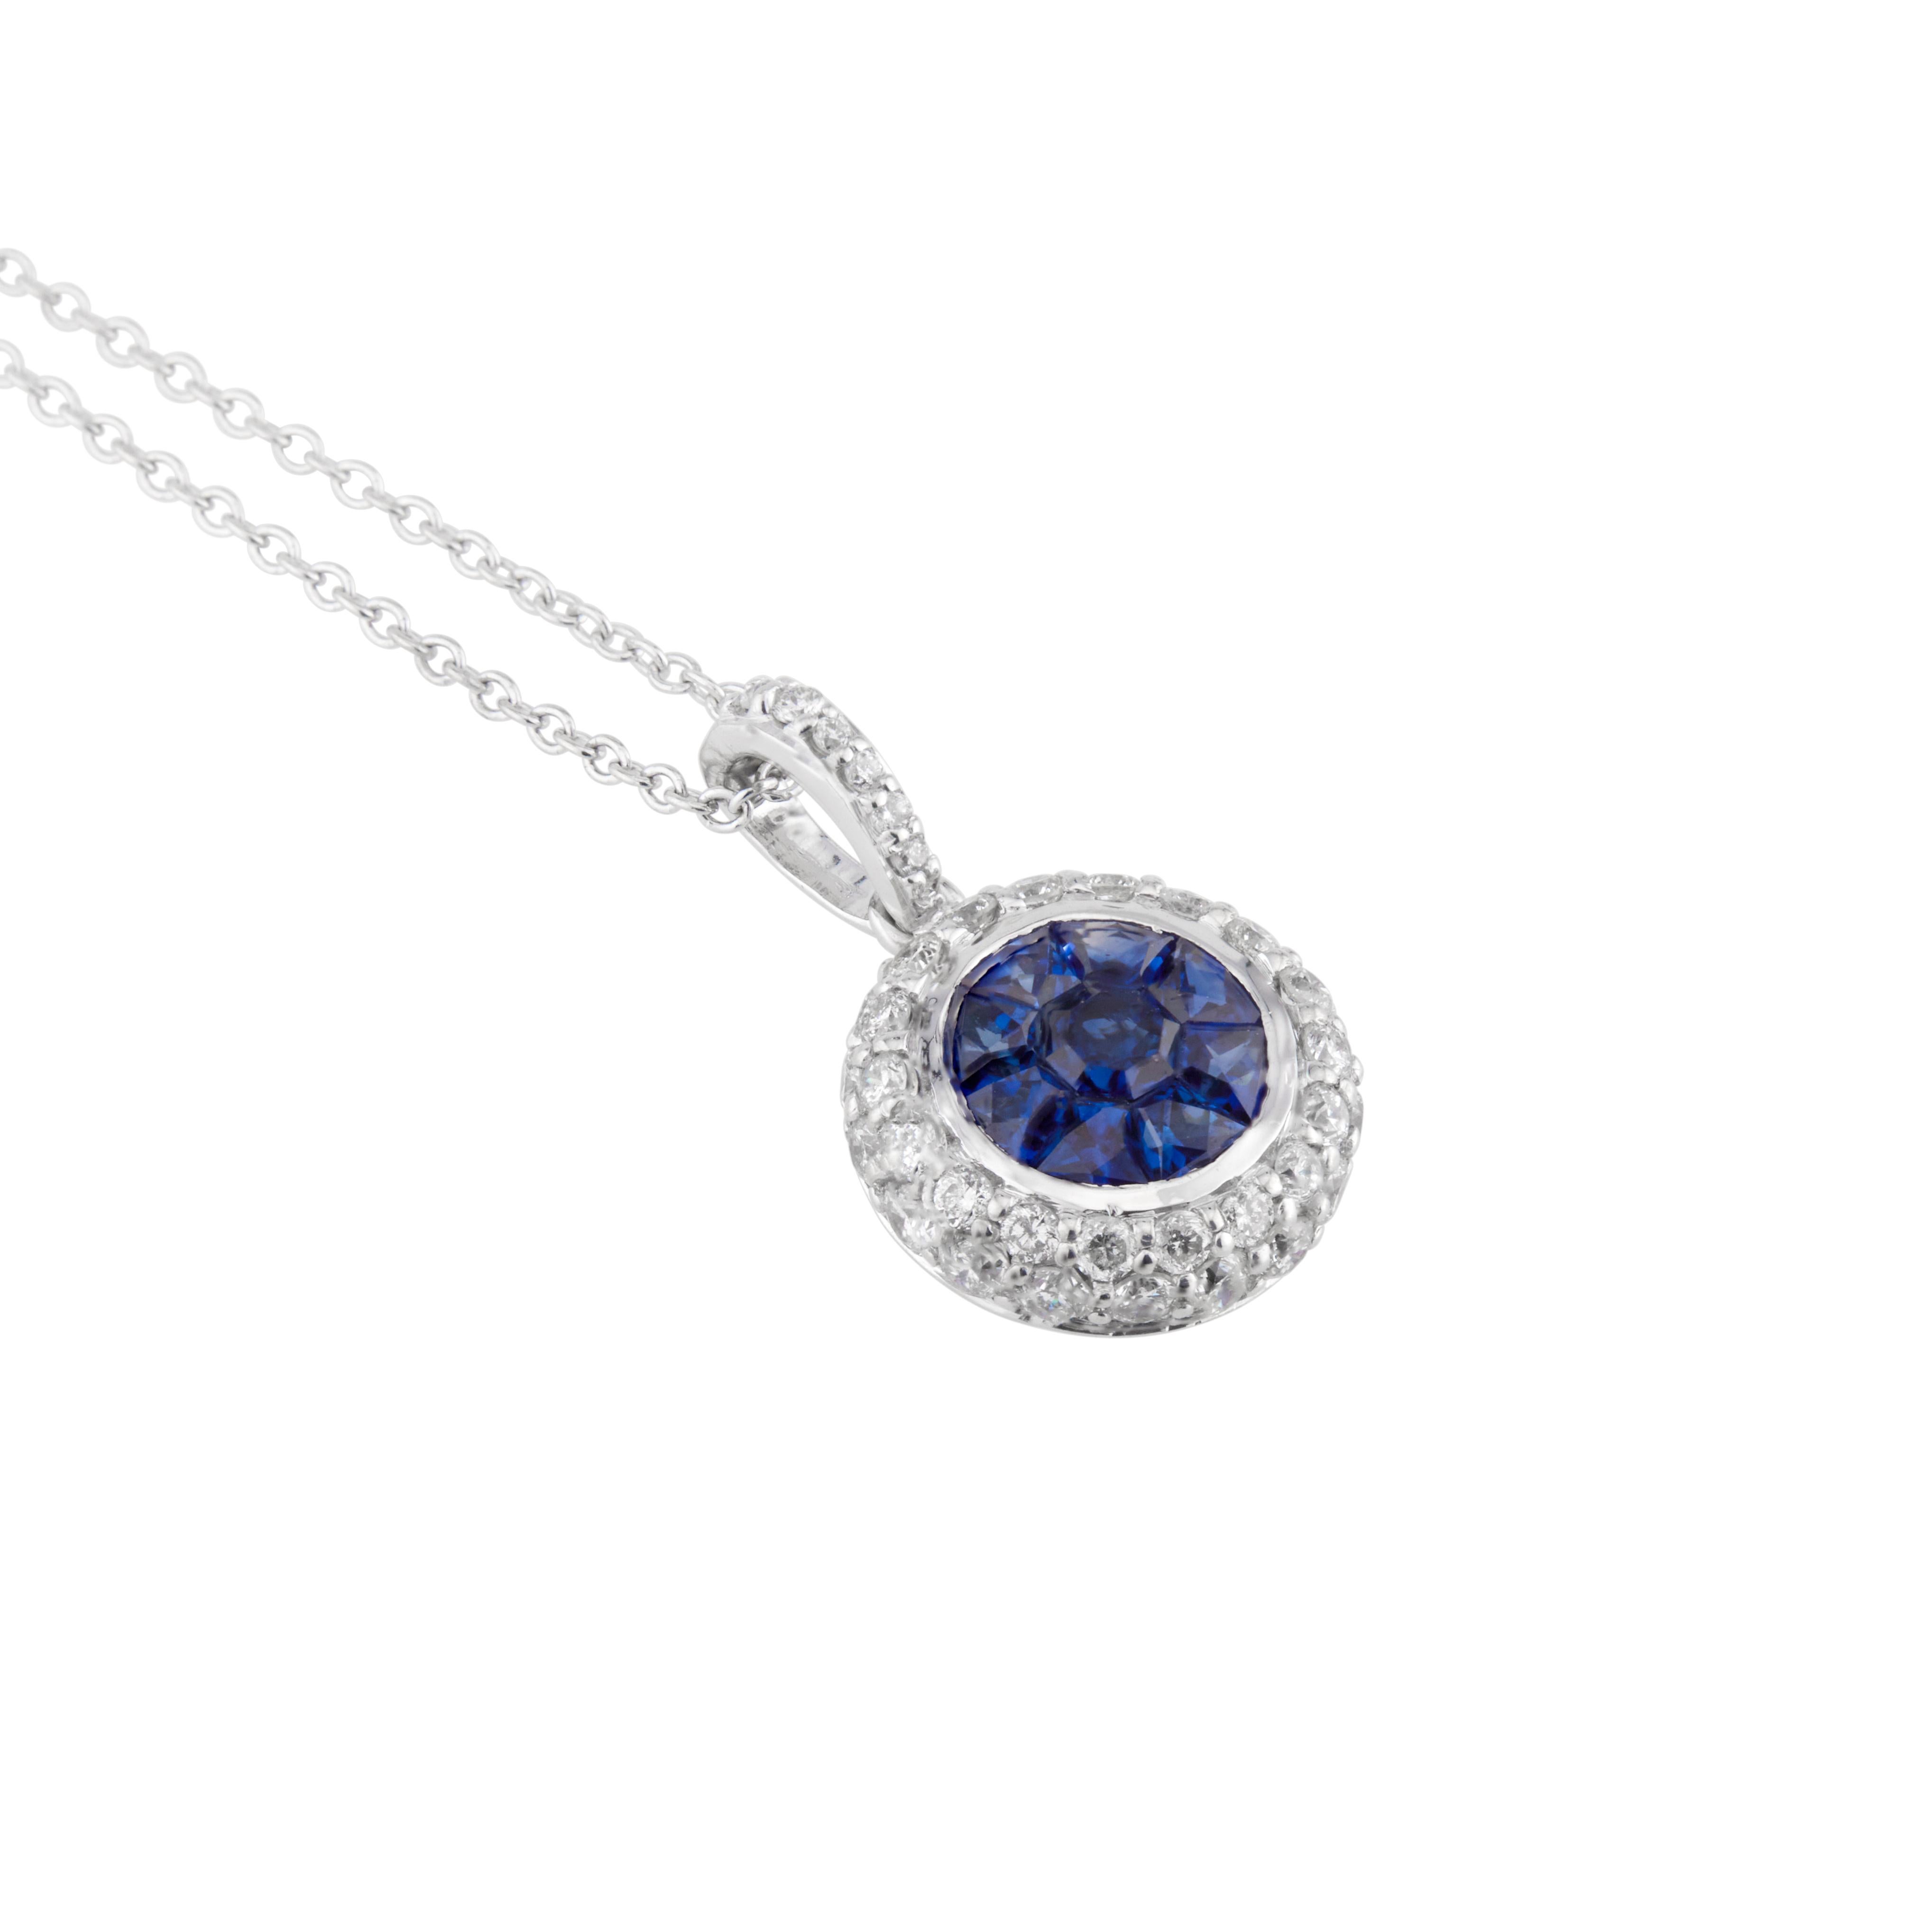 Effy Invisible set blue sapphire and diamond pendant necklace. 1 round center sapphire with 8 French cut accent diamonds with a double halo of 43 round brilliant cut diamonds. 18 inch chain.

8 French cut trapezoid blue sapphires, approx. .48cts
1